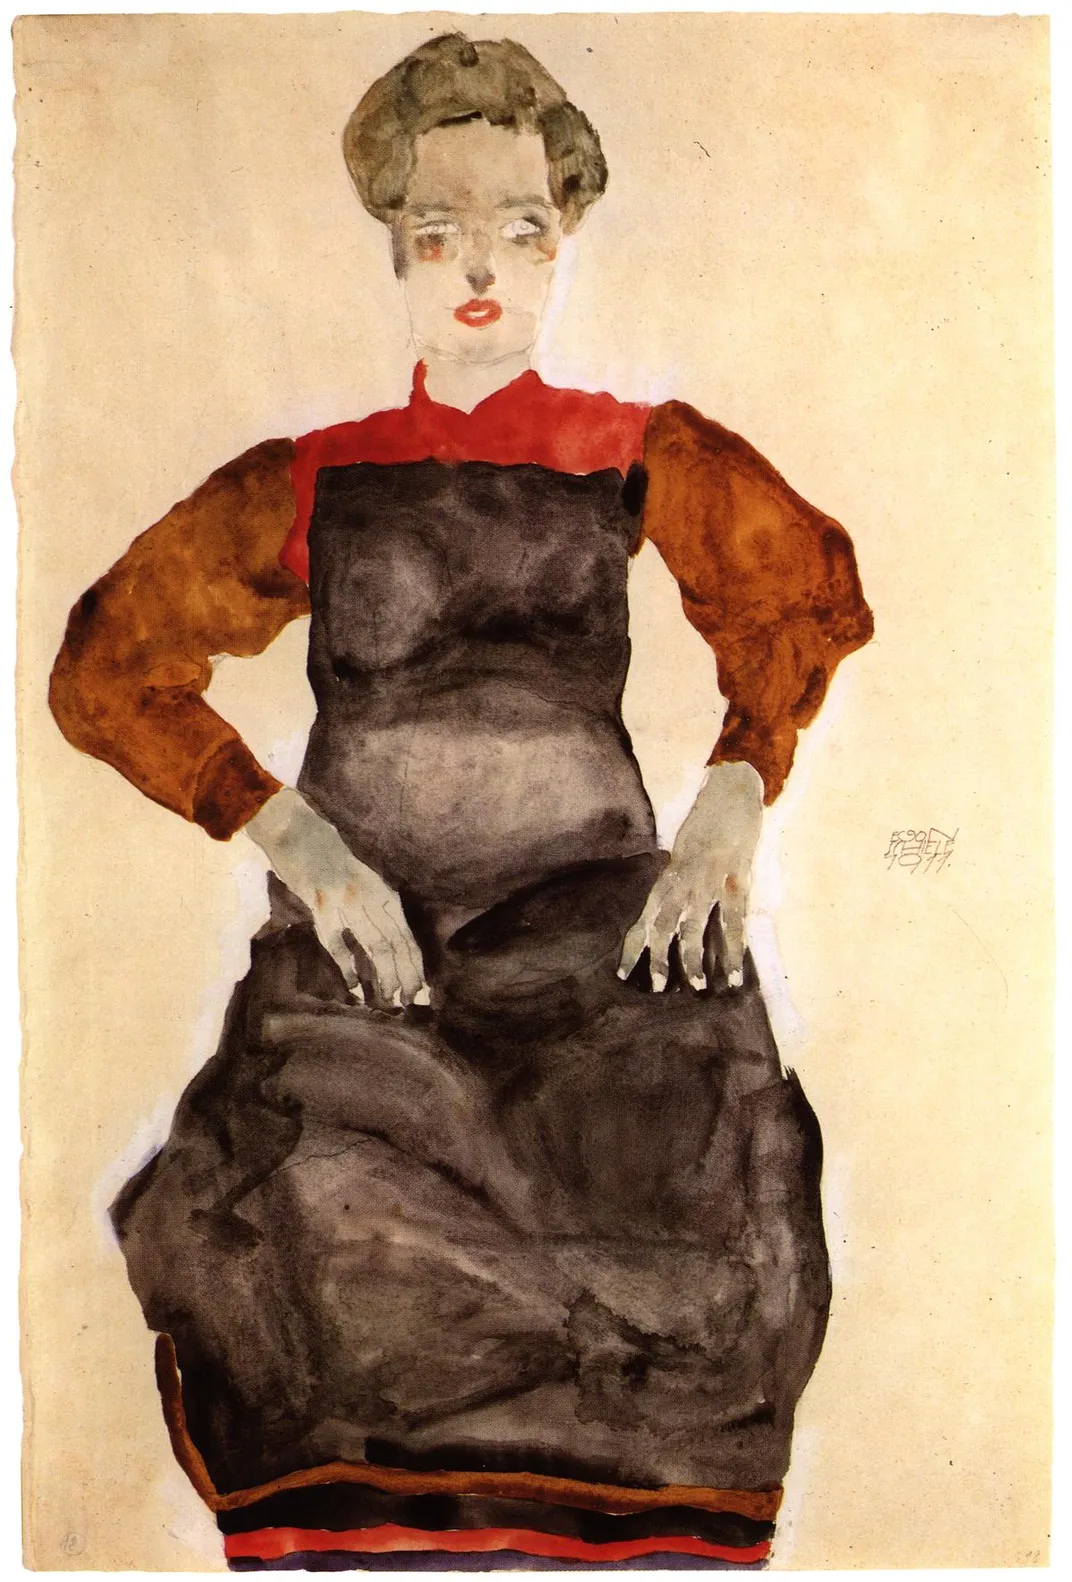 63 Works By Austrian Expressionist Egon Schiele Are at the Center of the Latest Nazi-Looted Art Dispute